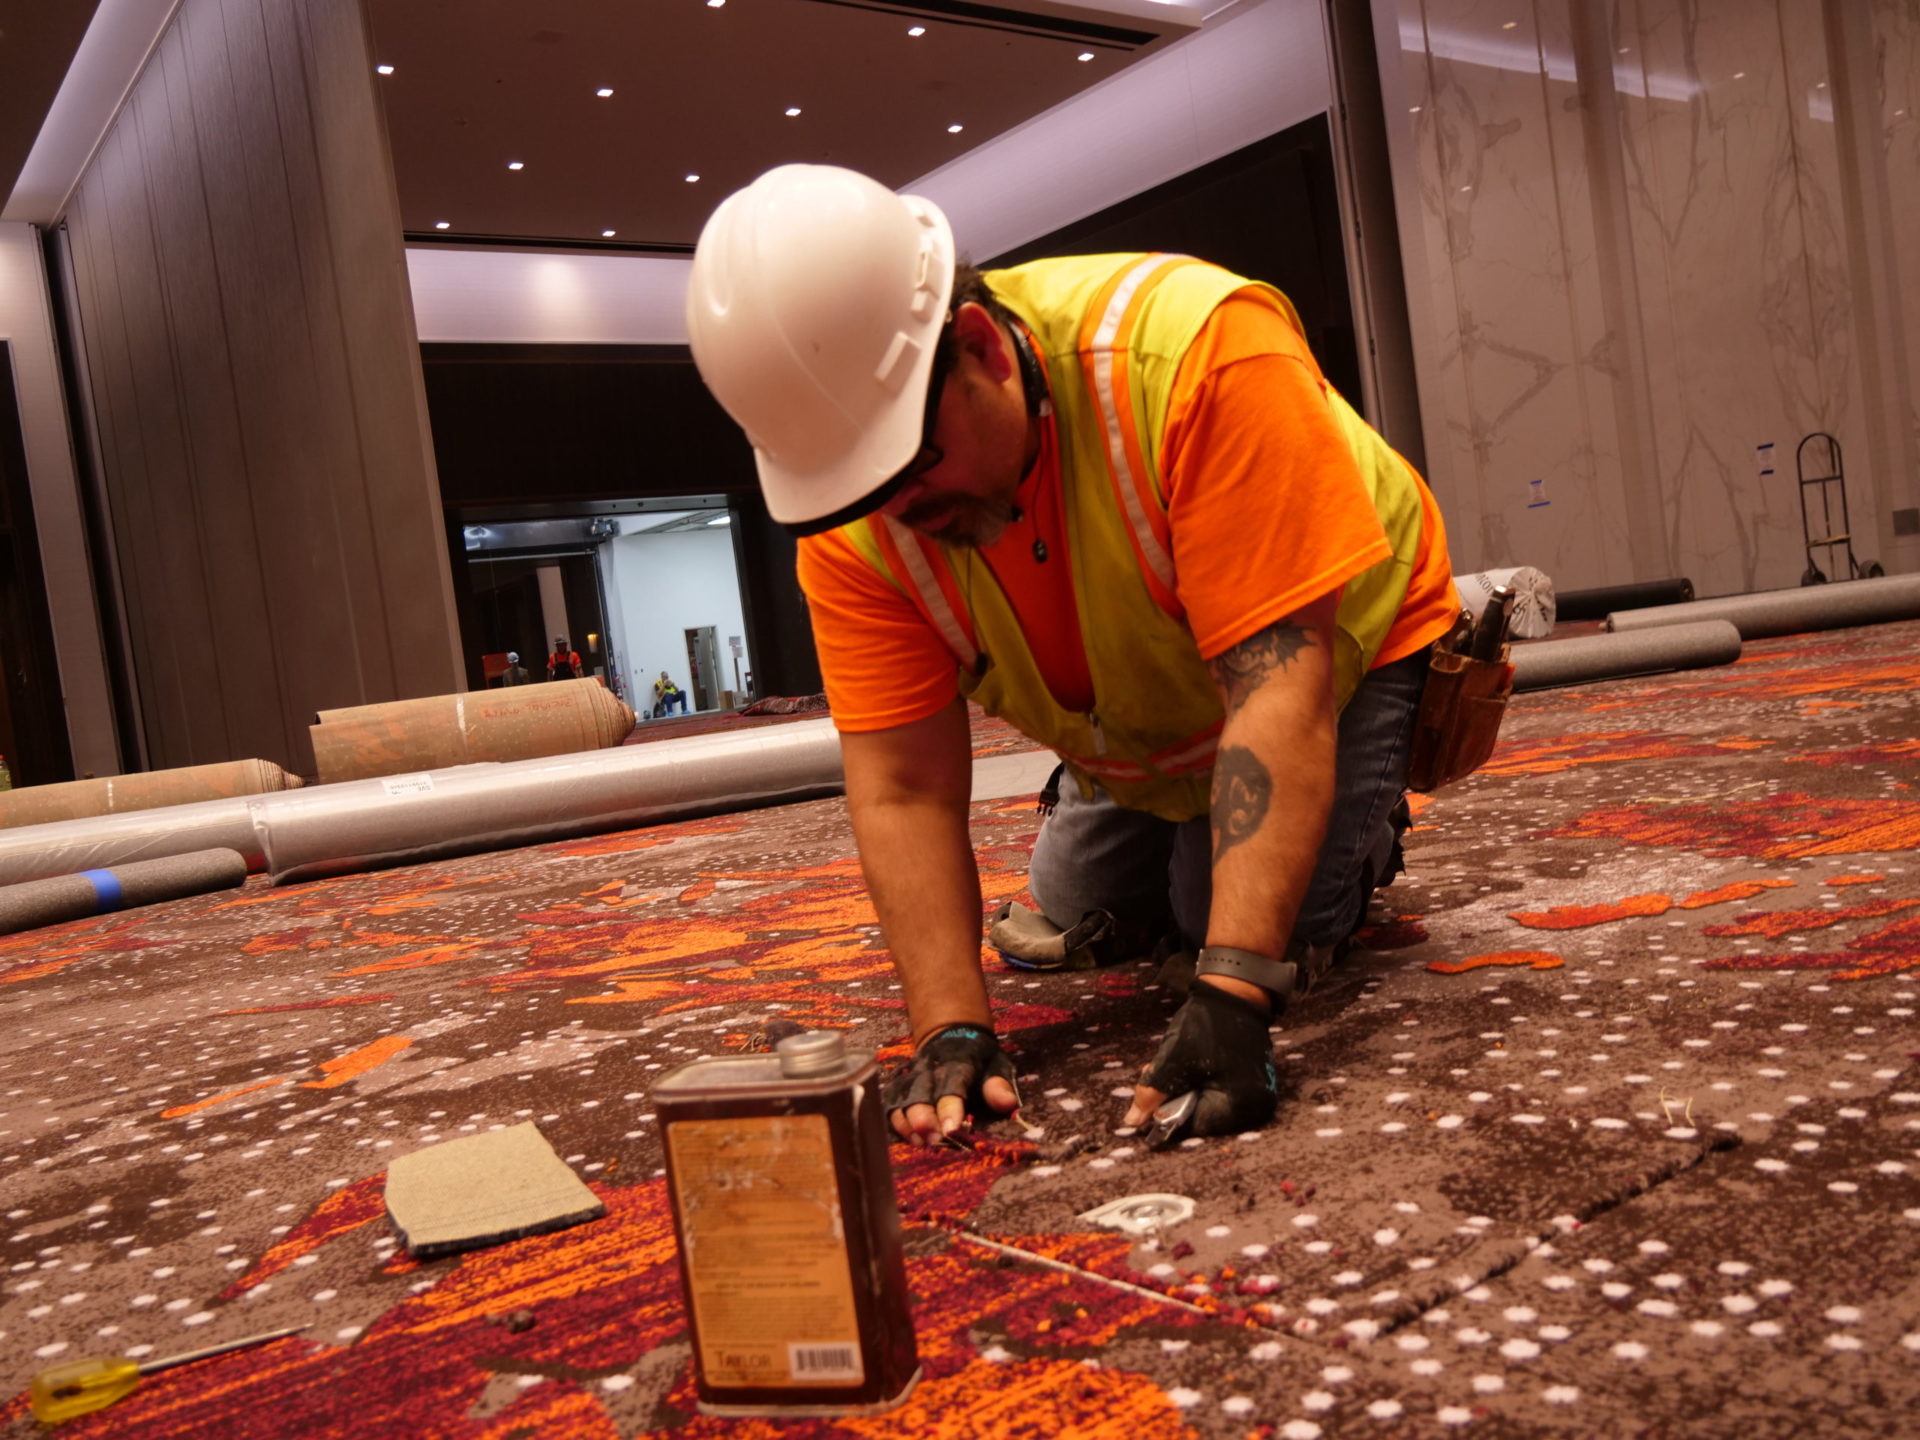 Image from the Gallery: Caesars Forum Conference Center – Las Vegas, NV